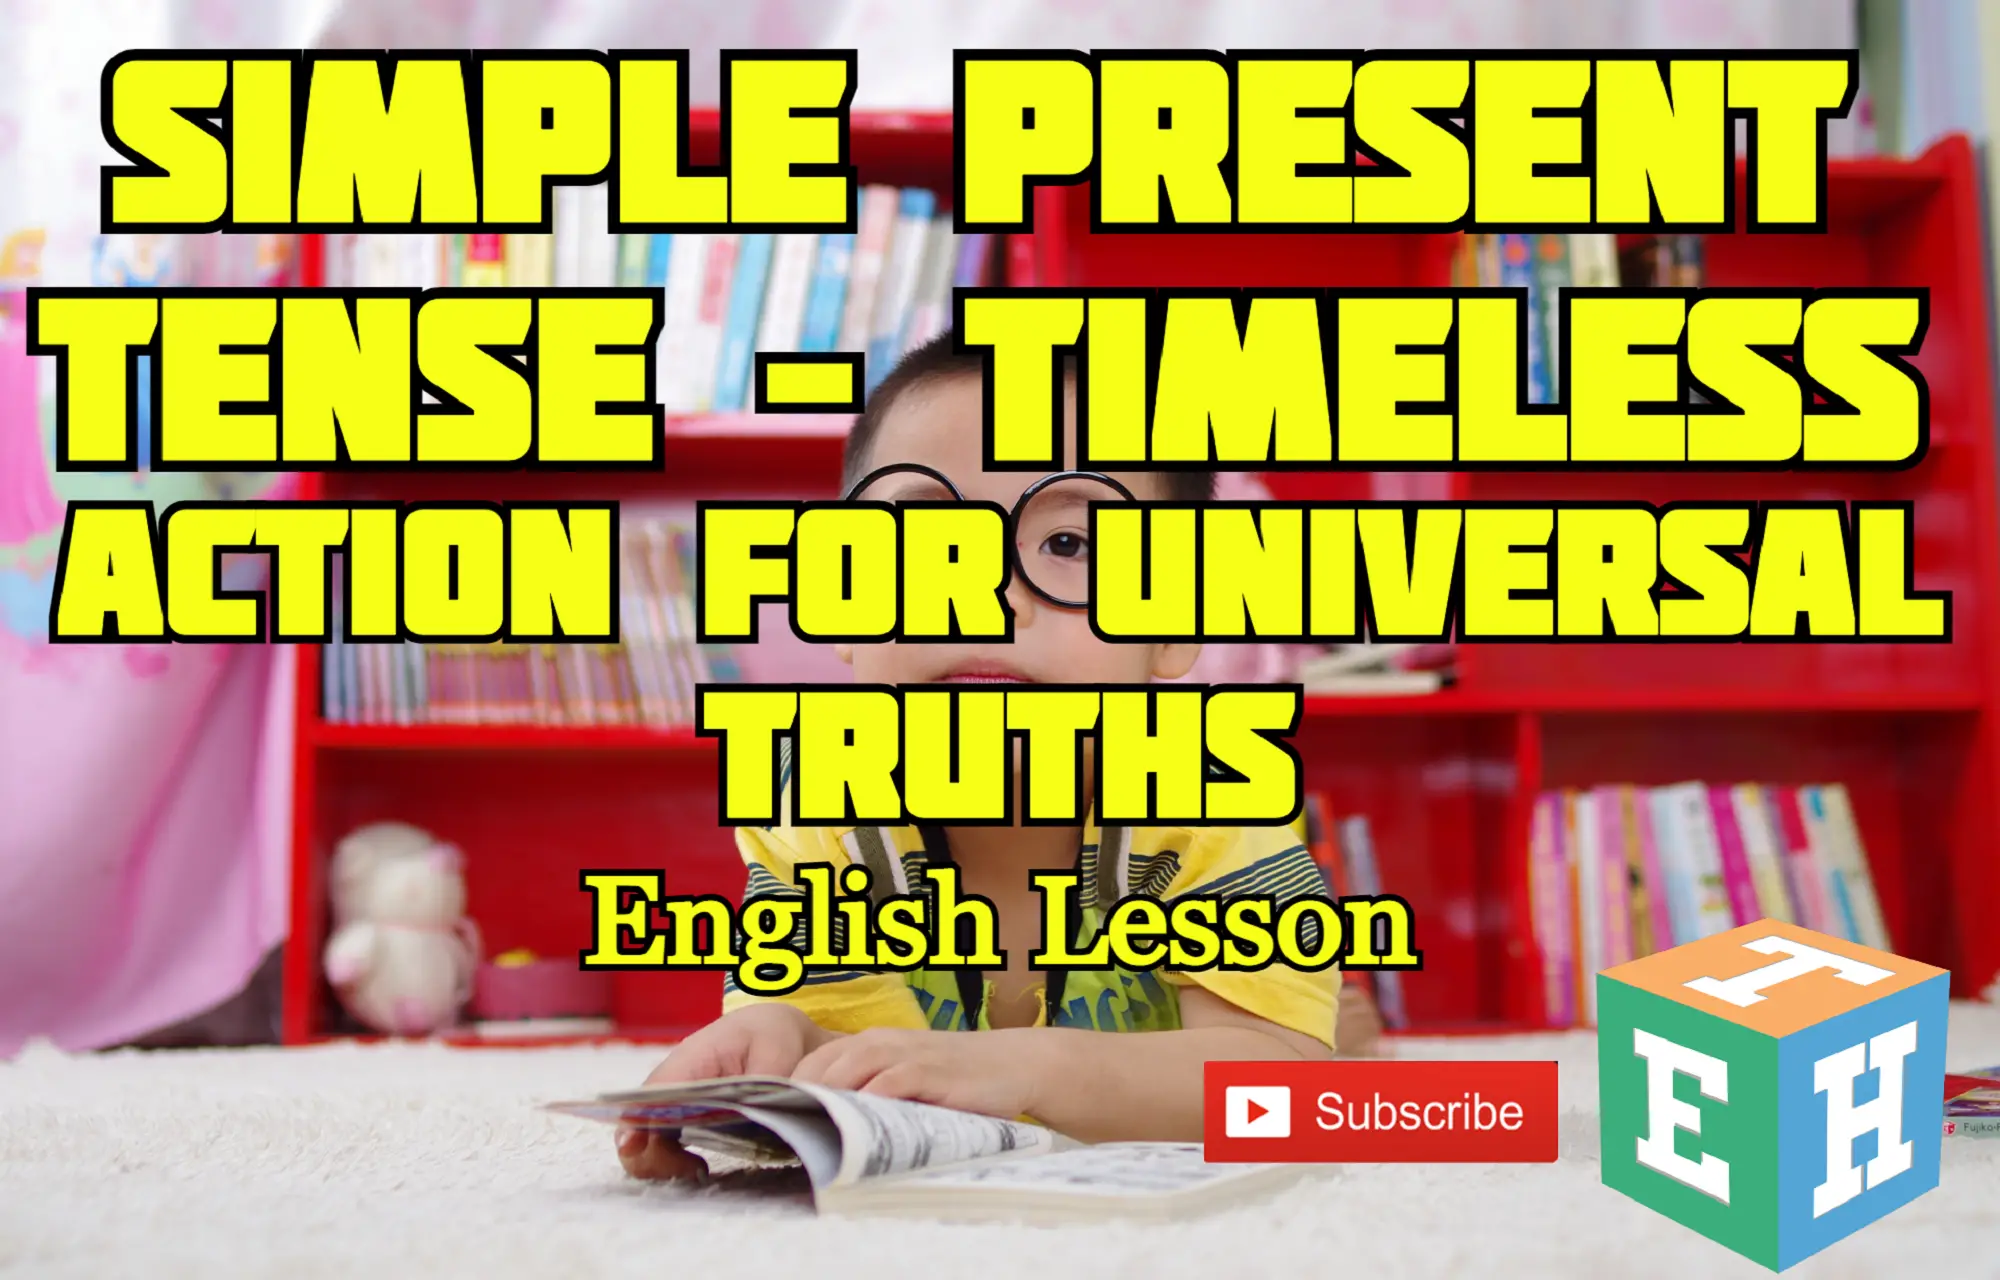 Simple Present Tense-Timeless Action for Universal Truths